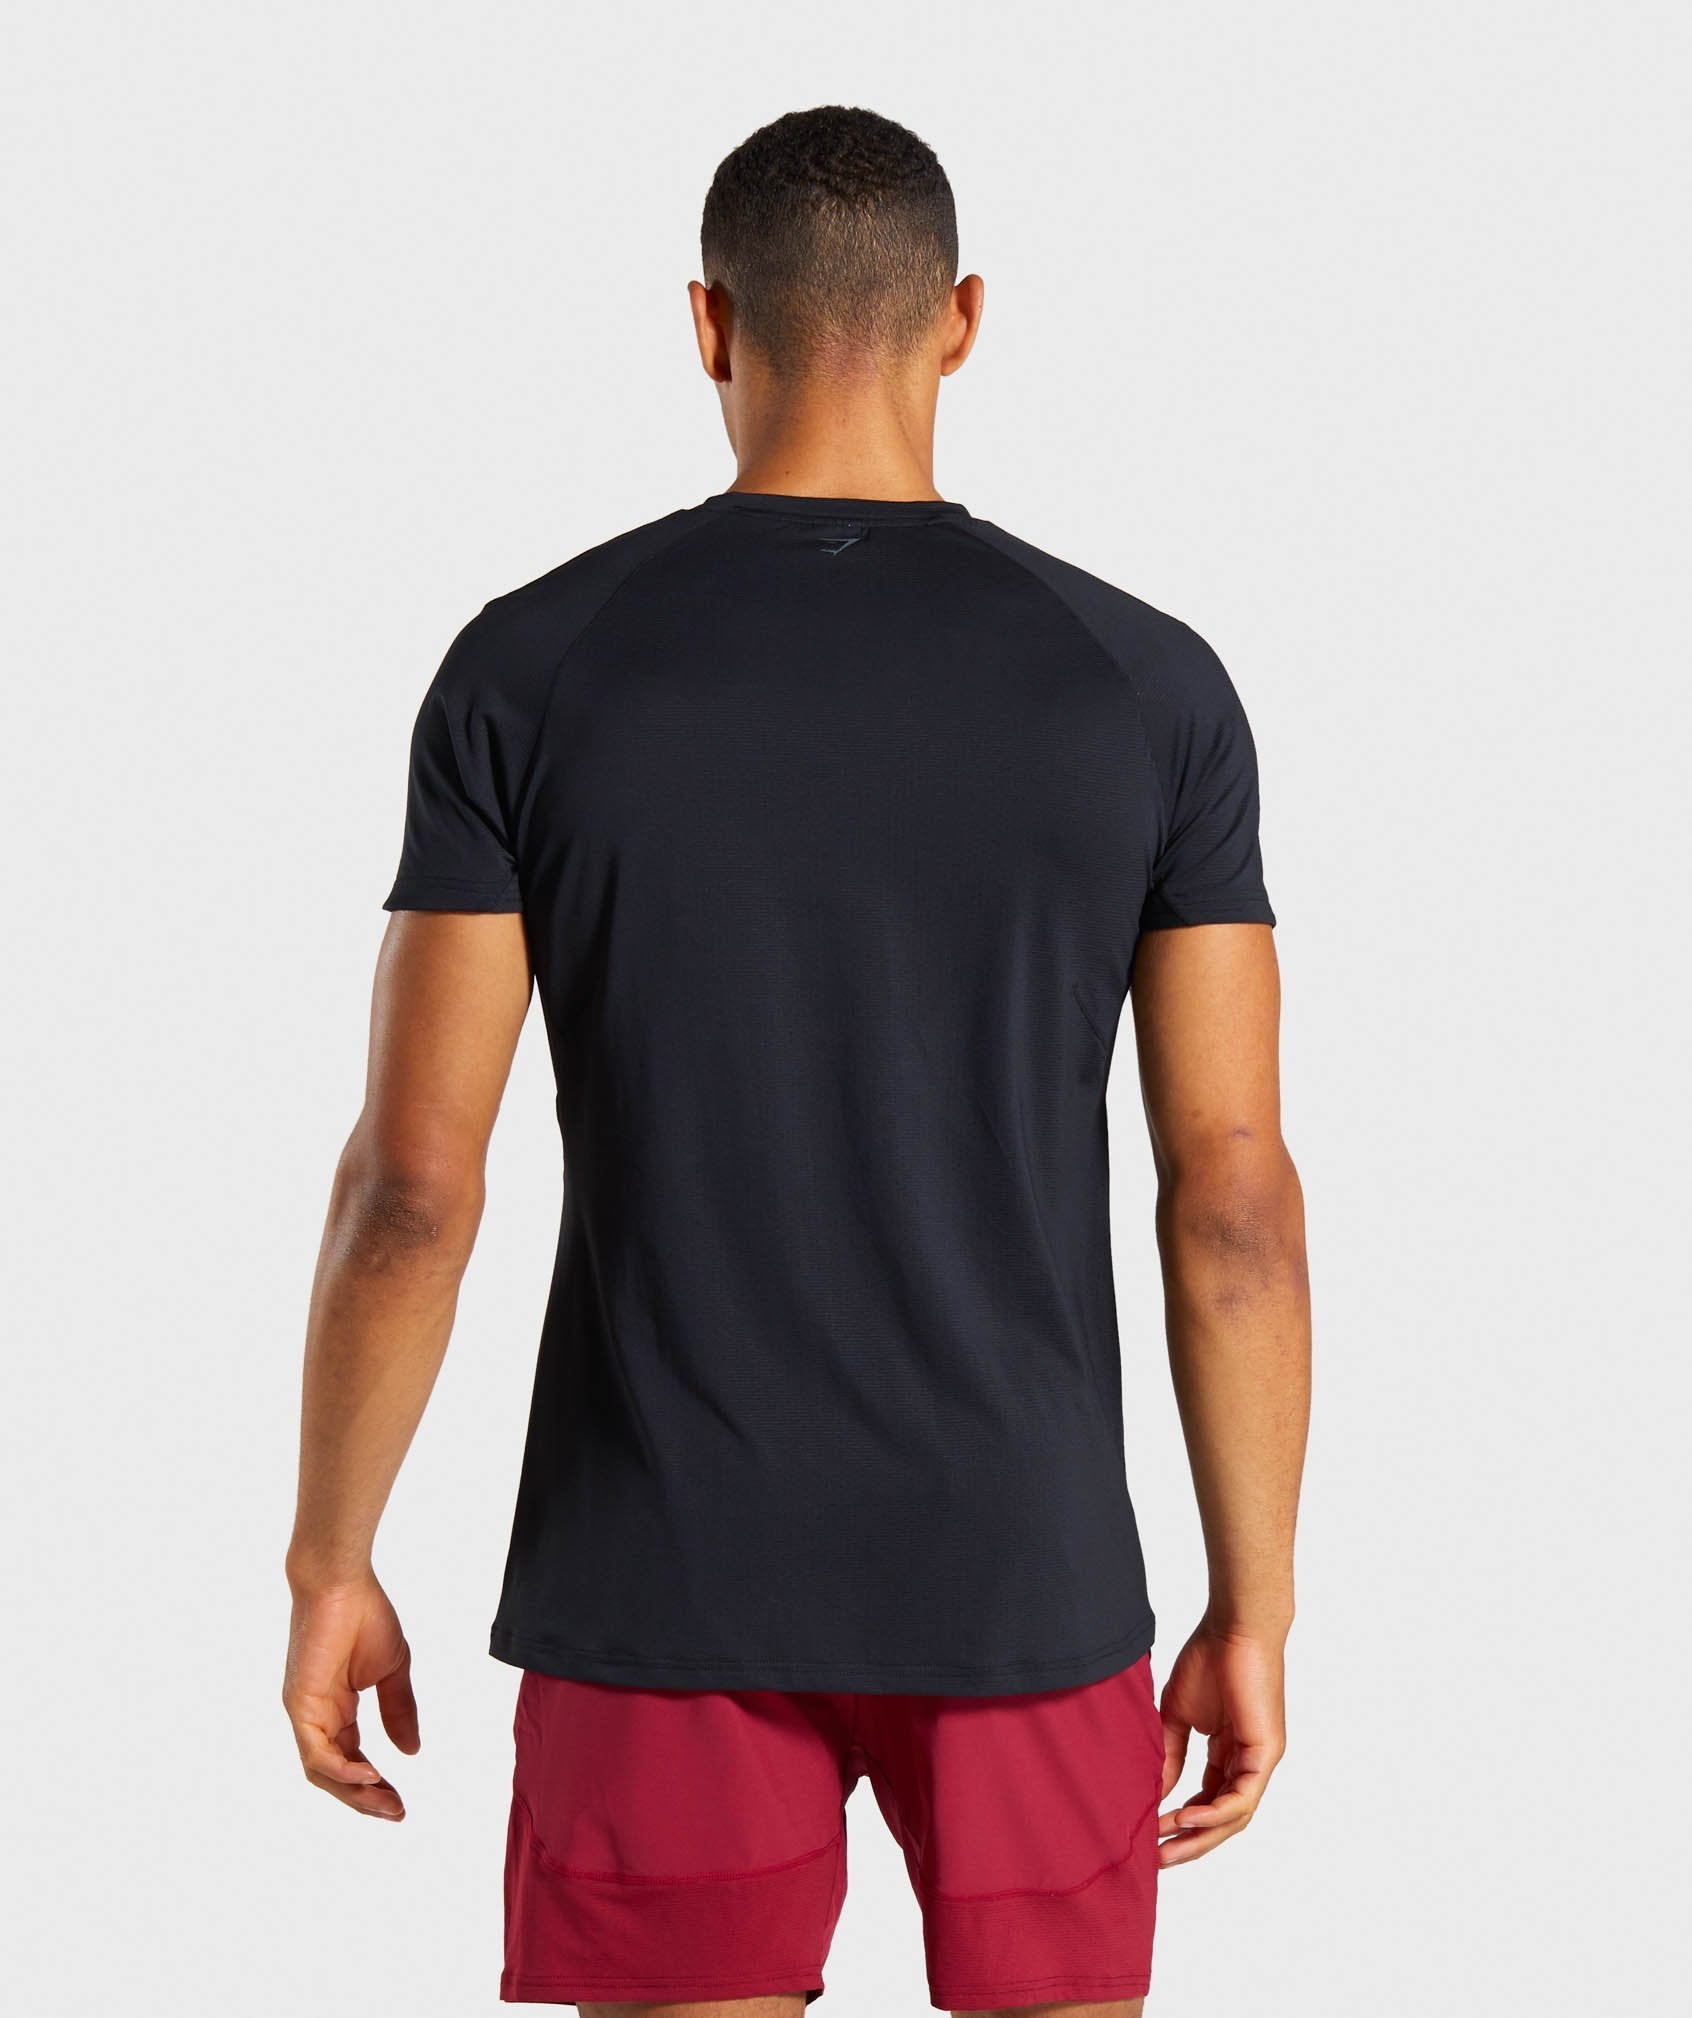 Contemporary T-Shirt in Black/Black - view 2